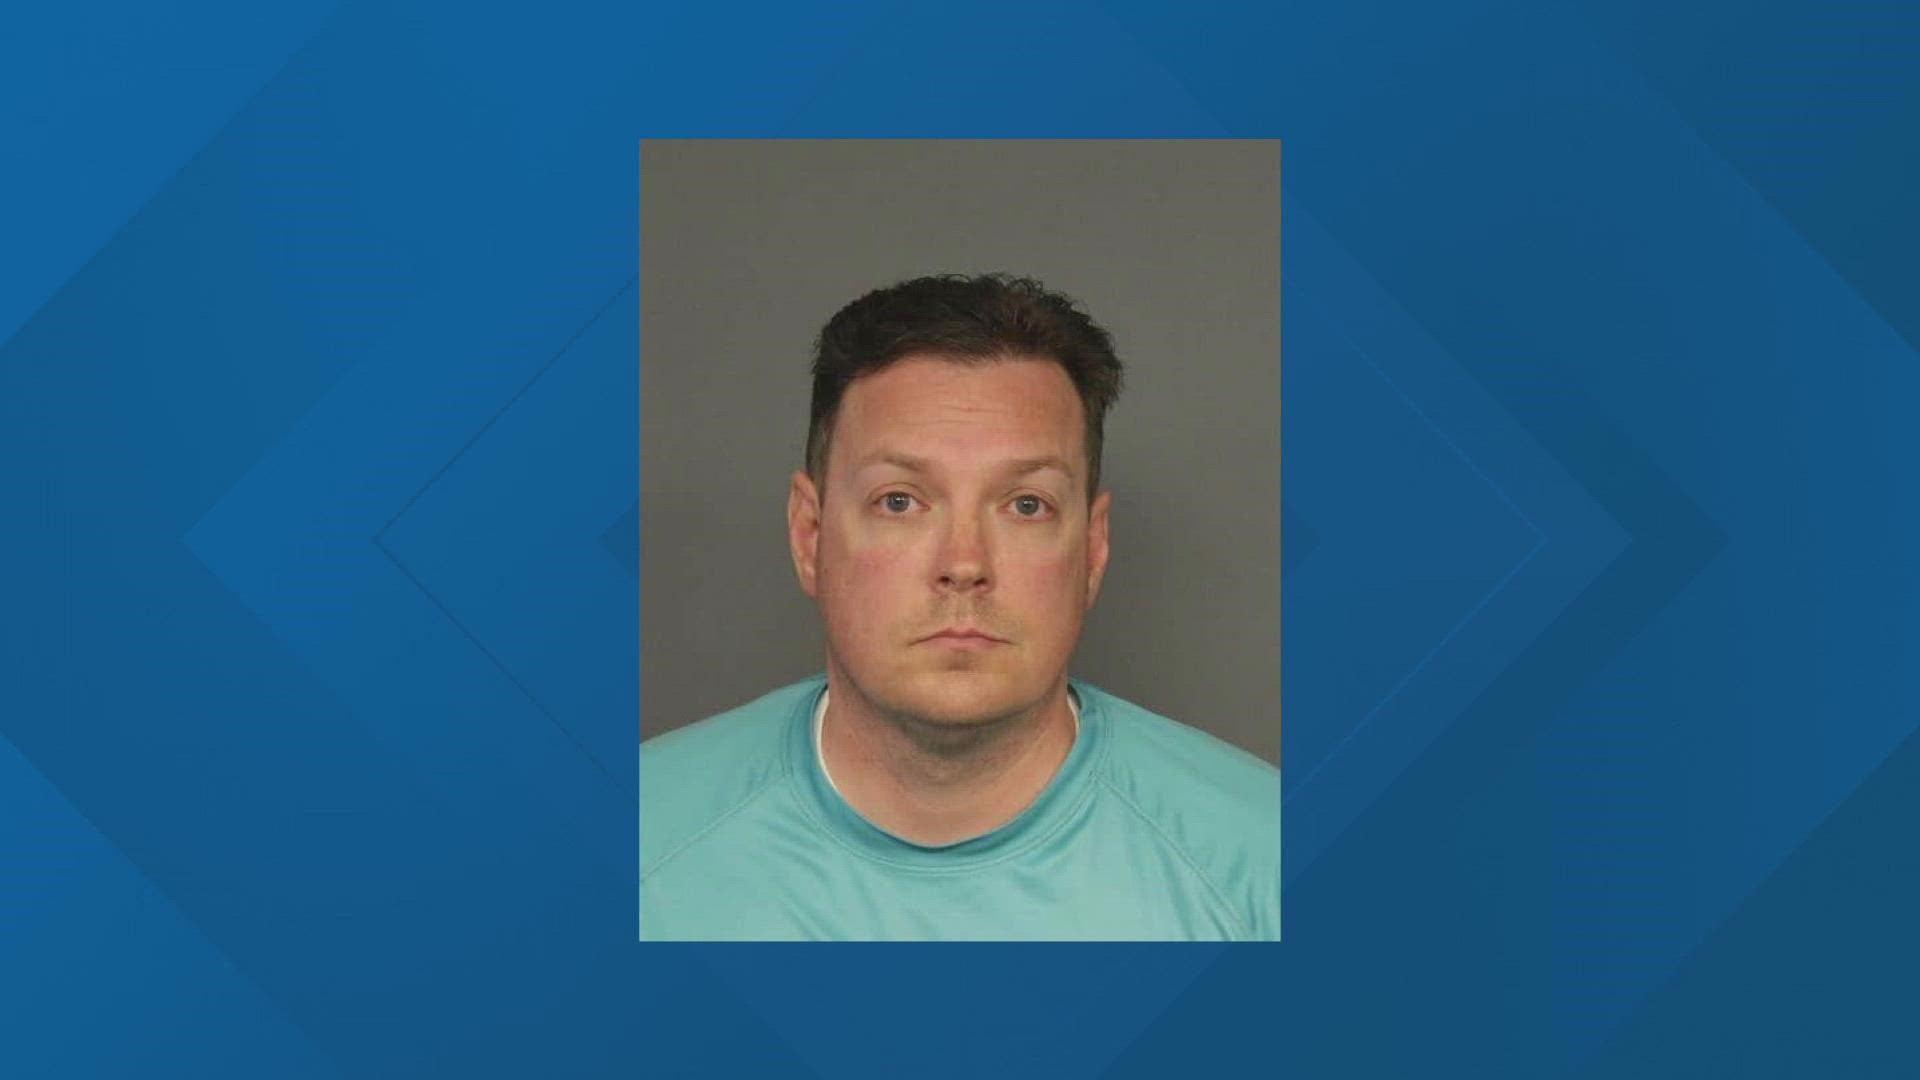 William Schwartz, 43, has been indicted on three felony counts. He is accused of stealing from two charities, including Shriners Hospital for Children.